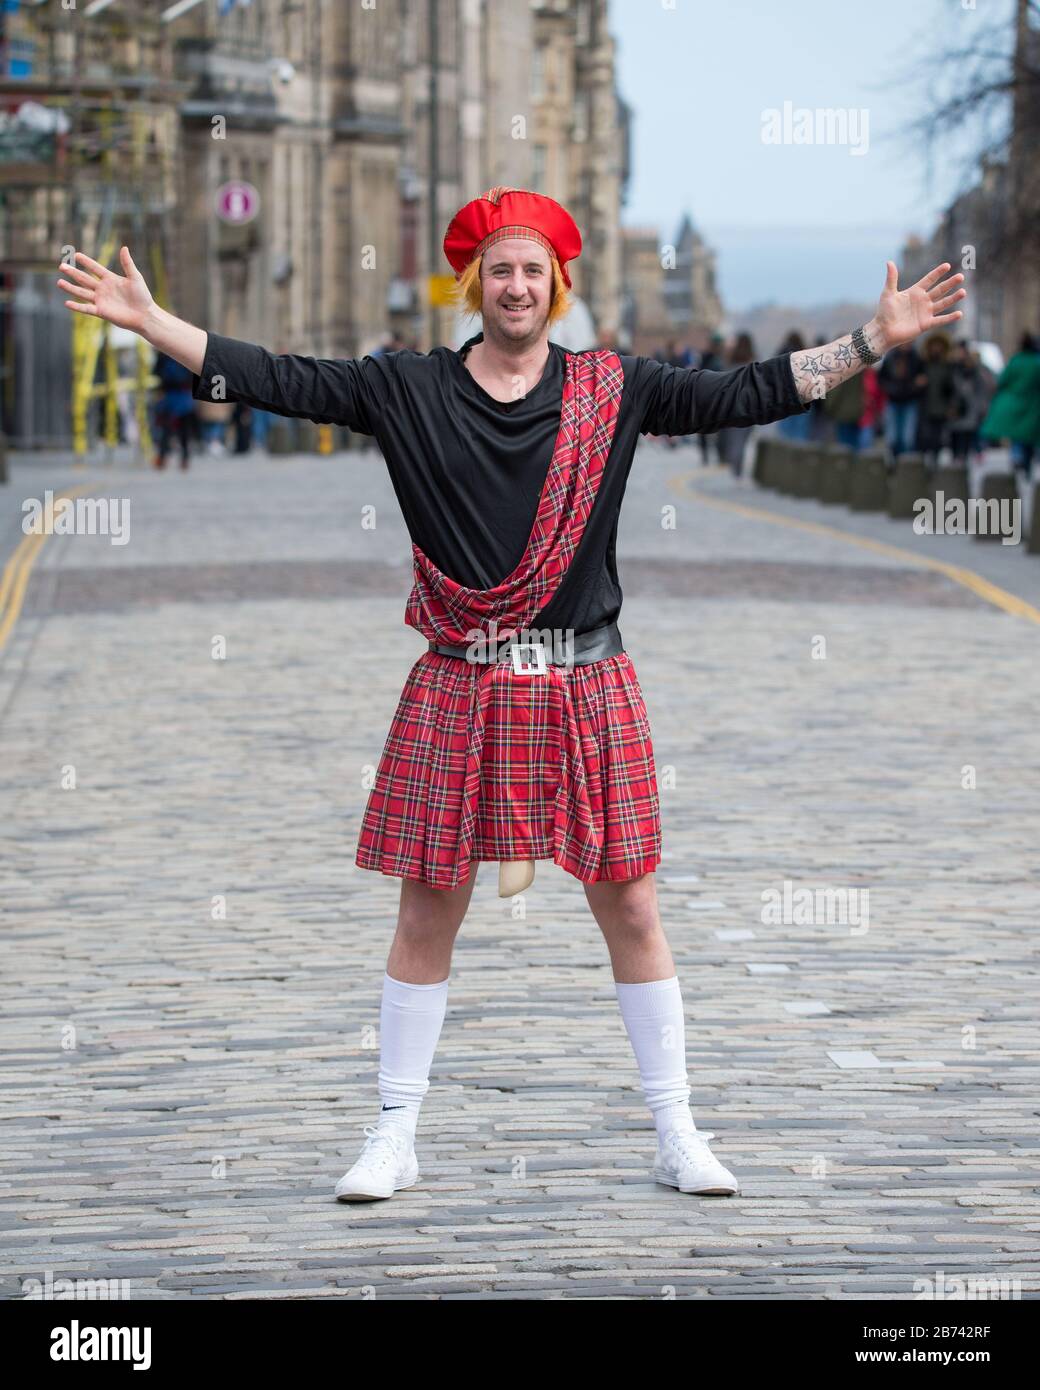 Edinburgh, UK. 13th Mar, 2020. Pictured: Man seen on the Royal Mile in Edinburgh wearing a tartan kilt, tartan plaid and red hat, strutting his stuff for the camera. Credit: Colin Fisher/Alamy Live News Stock Photo